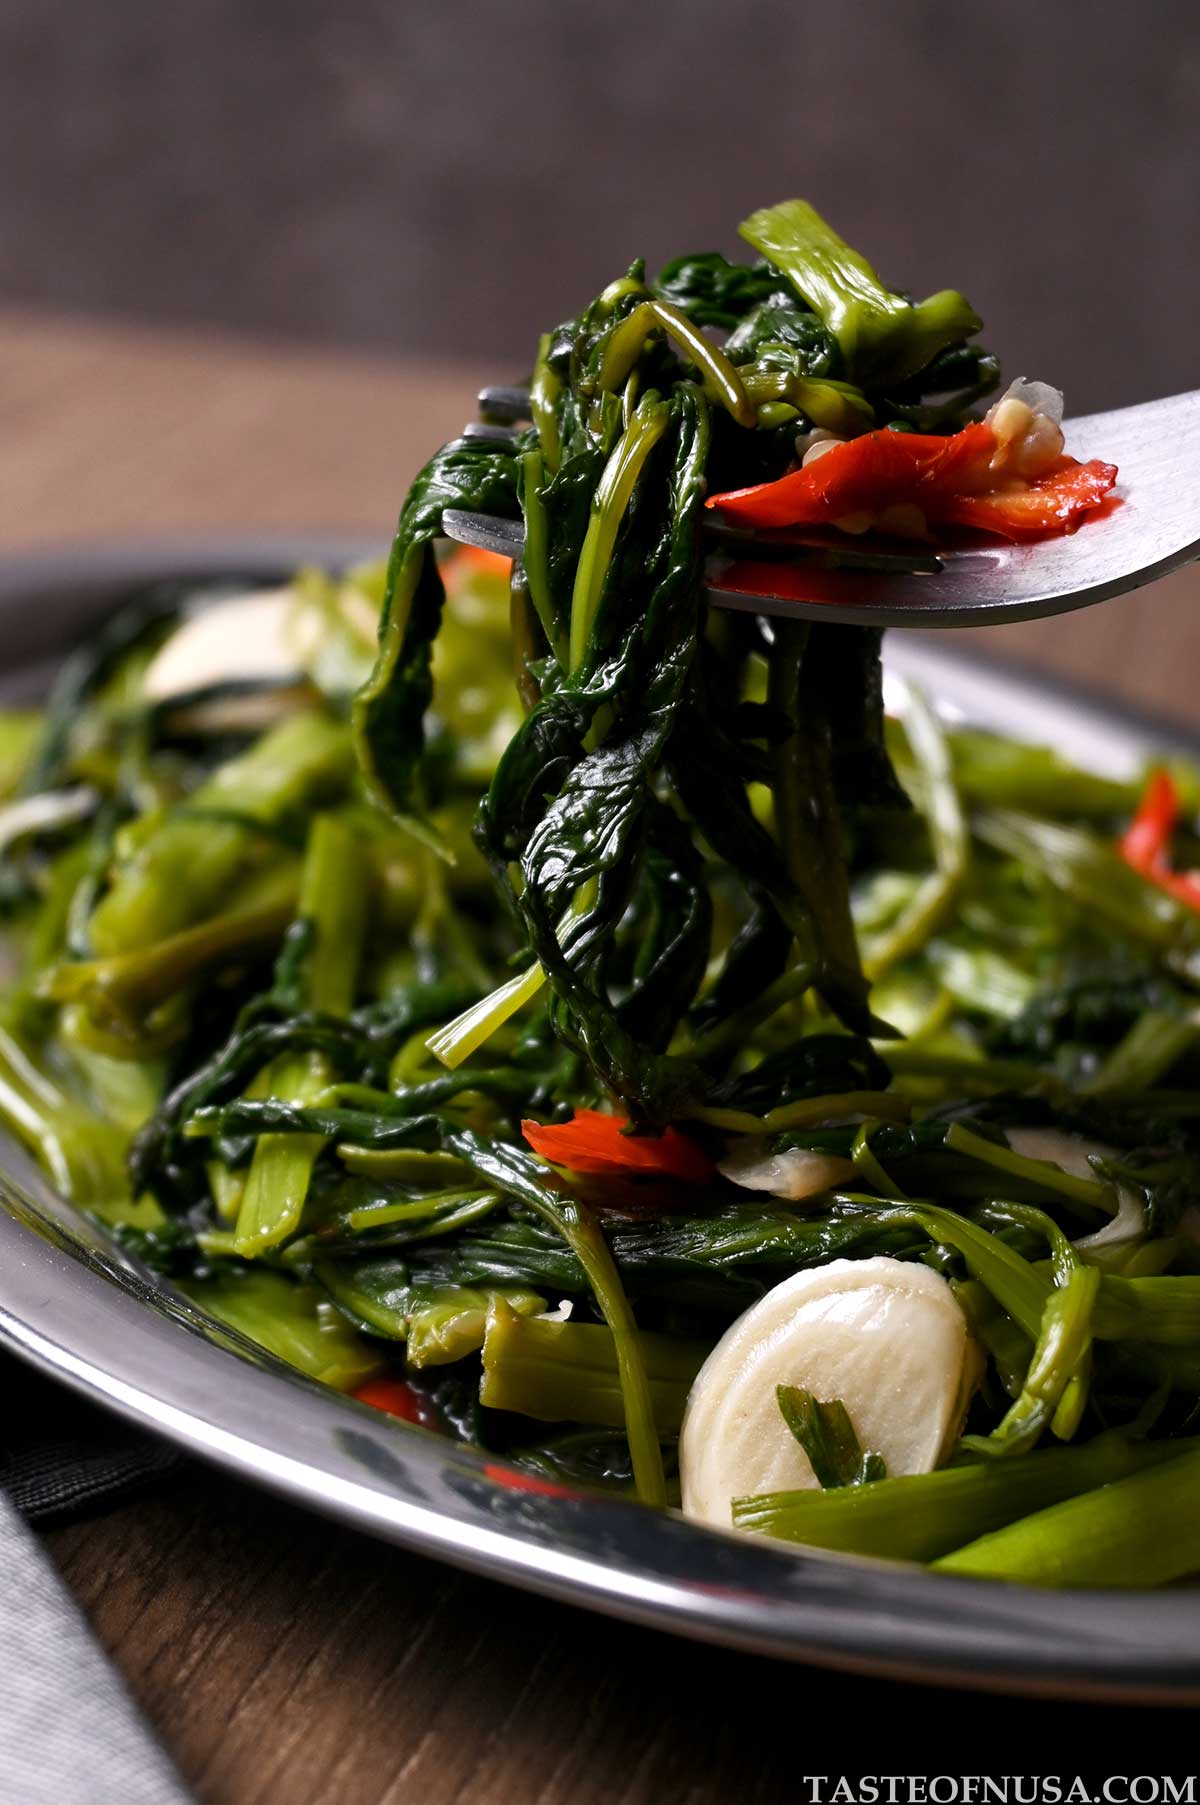 morning glory or water spinach stir fry cooked with shallots, garlic, and oyster sauce